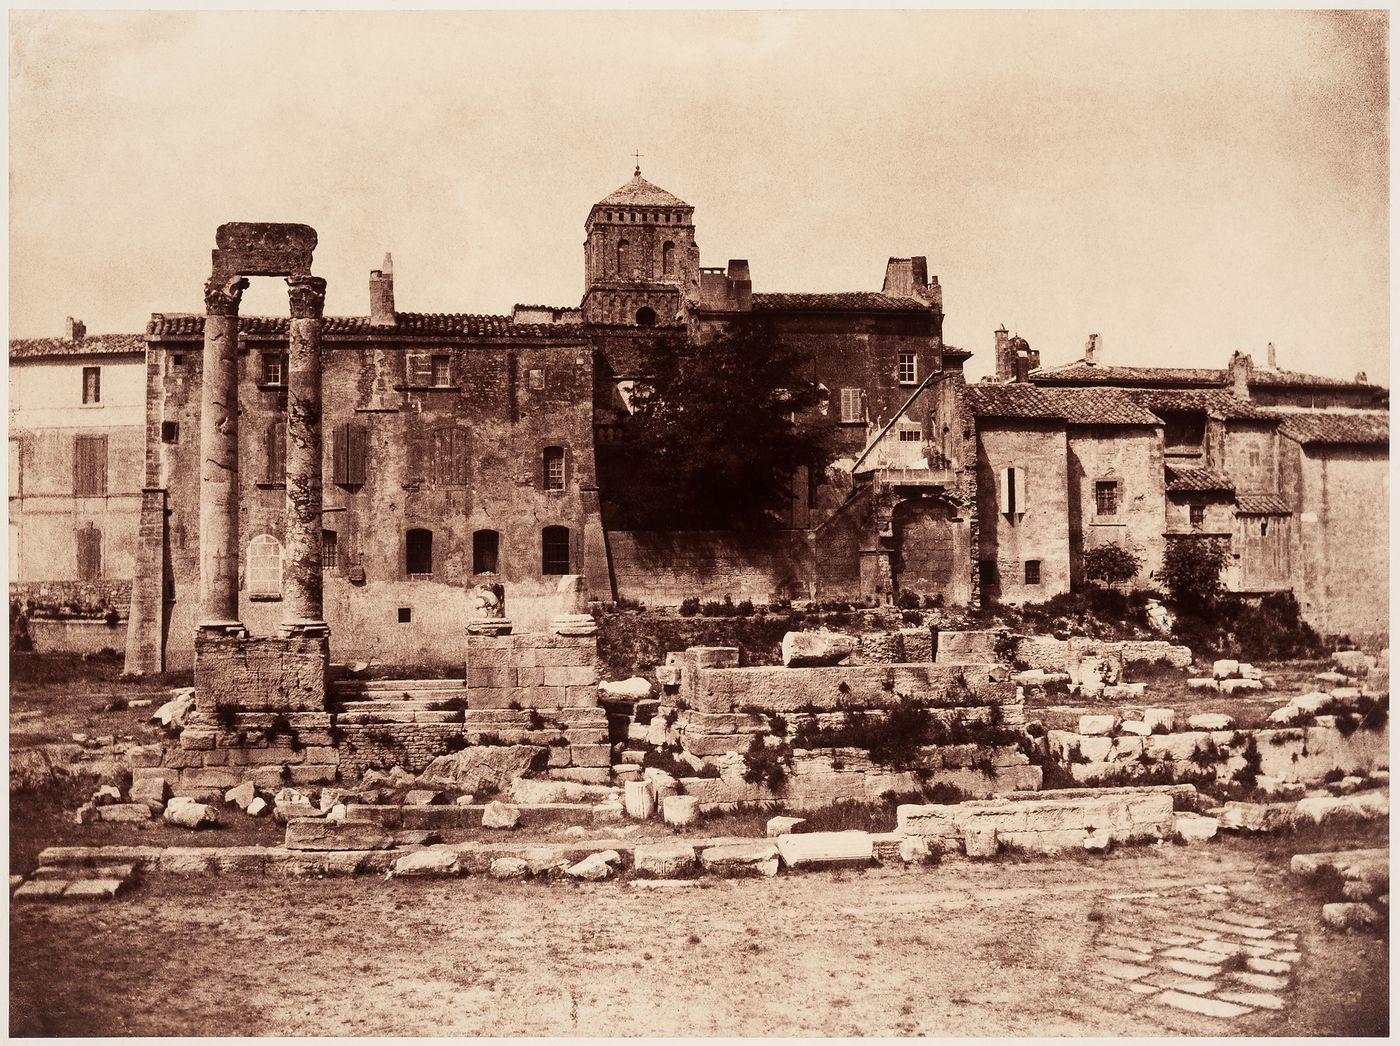 View of ruined Roman theater with town behind, Arles, France